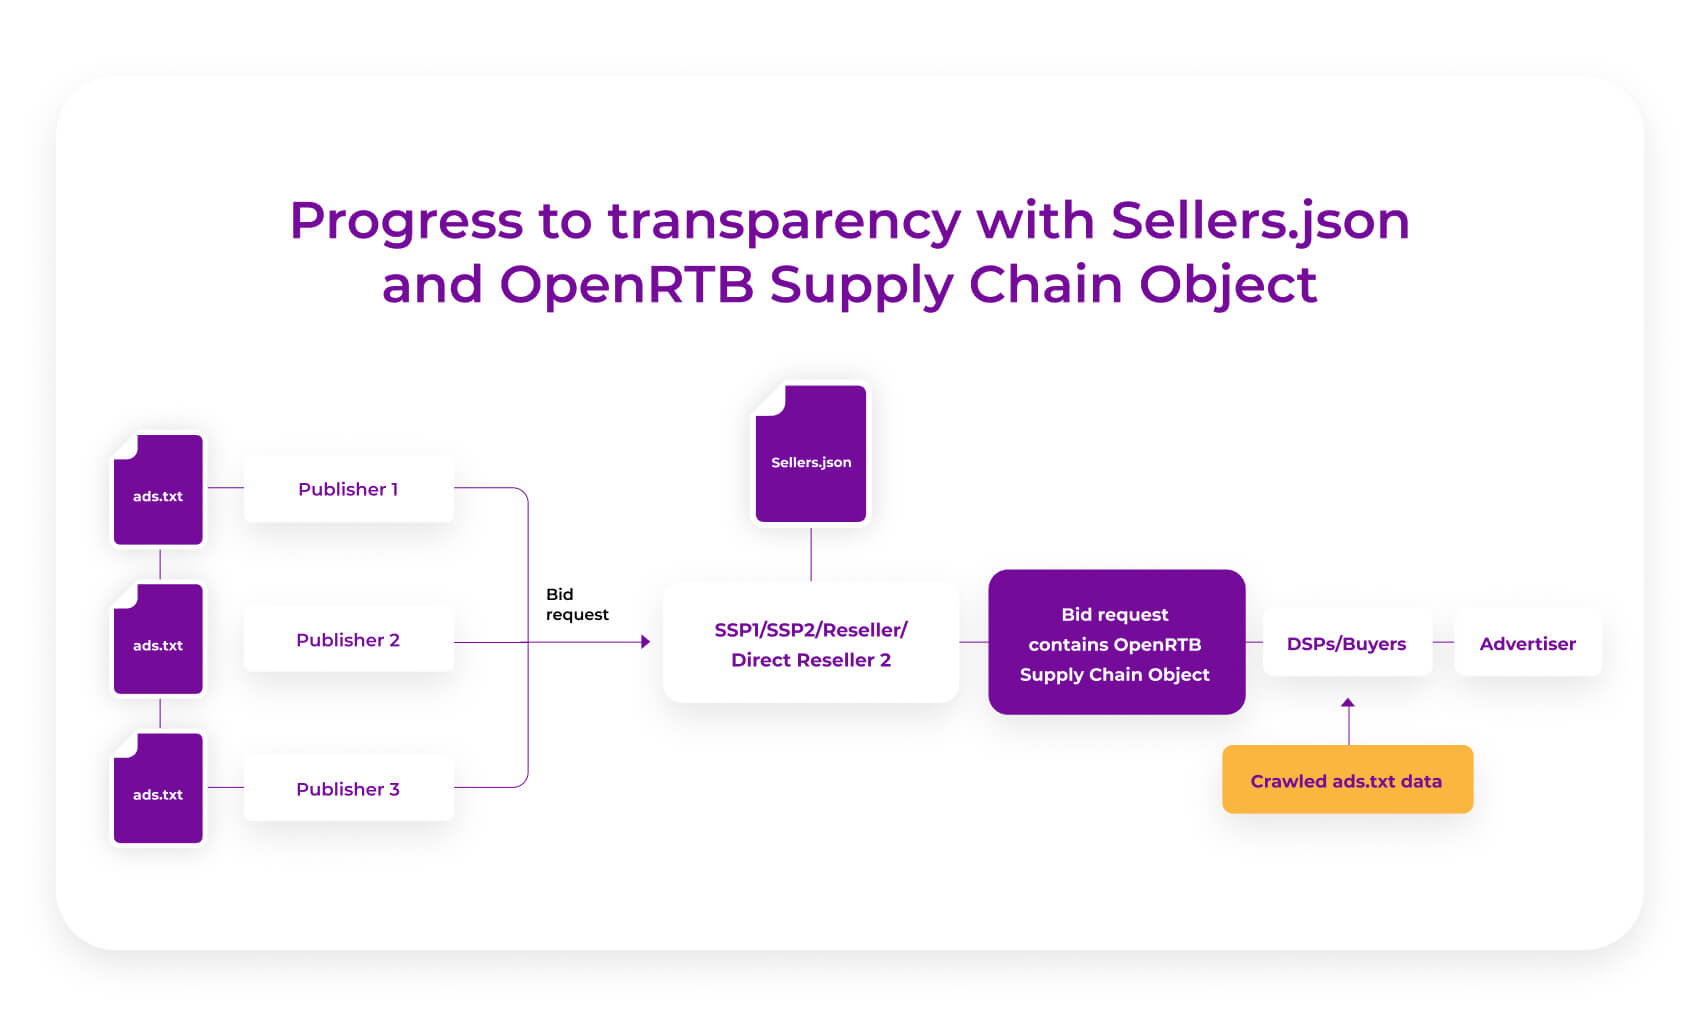 Why you should adopt Sellers.json and SupplyChain Object in your SSP.